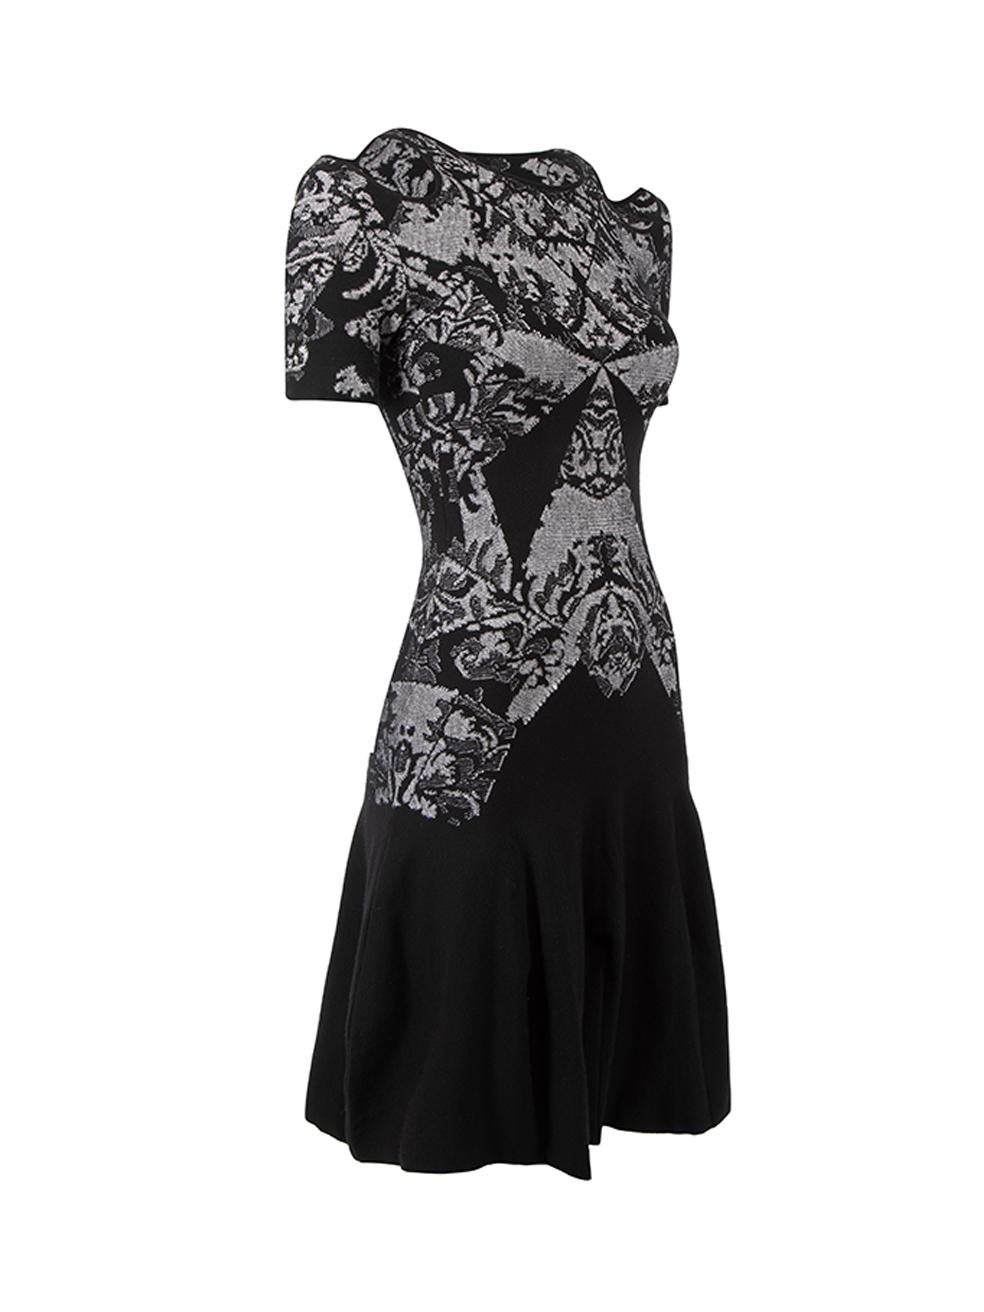 CONDITION is Very good. Hardly any visible wear to dress is evident on this used McQ Alexander McQueen designer resale item.



Details


Black

Viscose

Knit mini dress

Damask pattern

Round neckline

Shoulder cut out accent

Stretchy





Made in